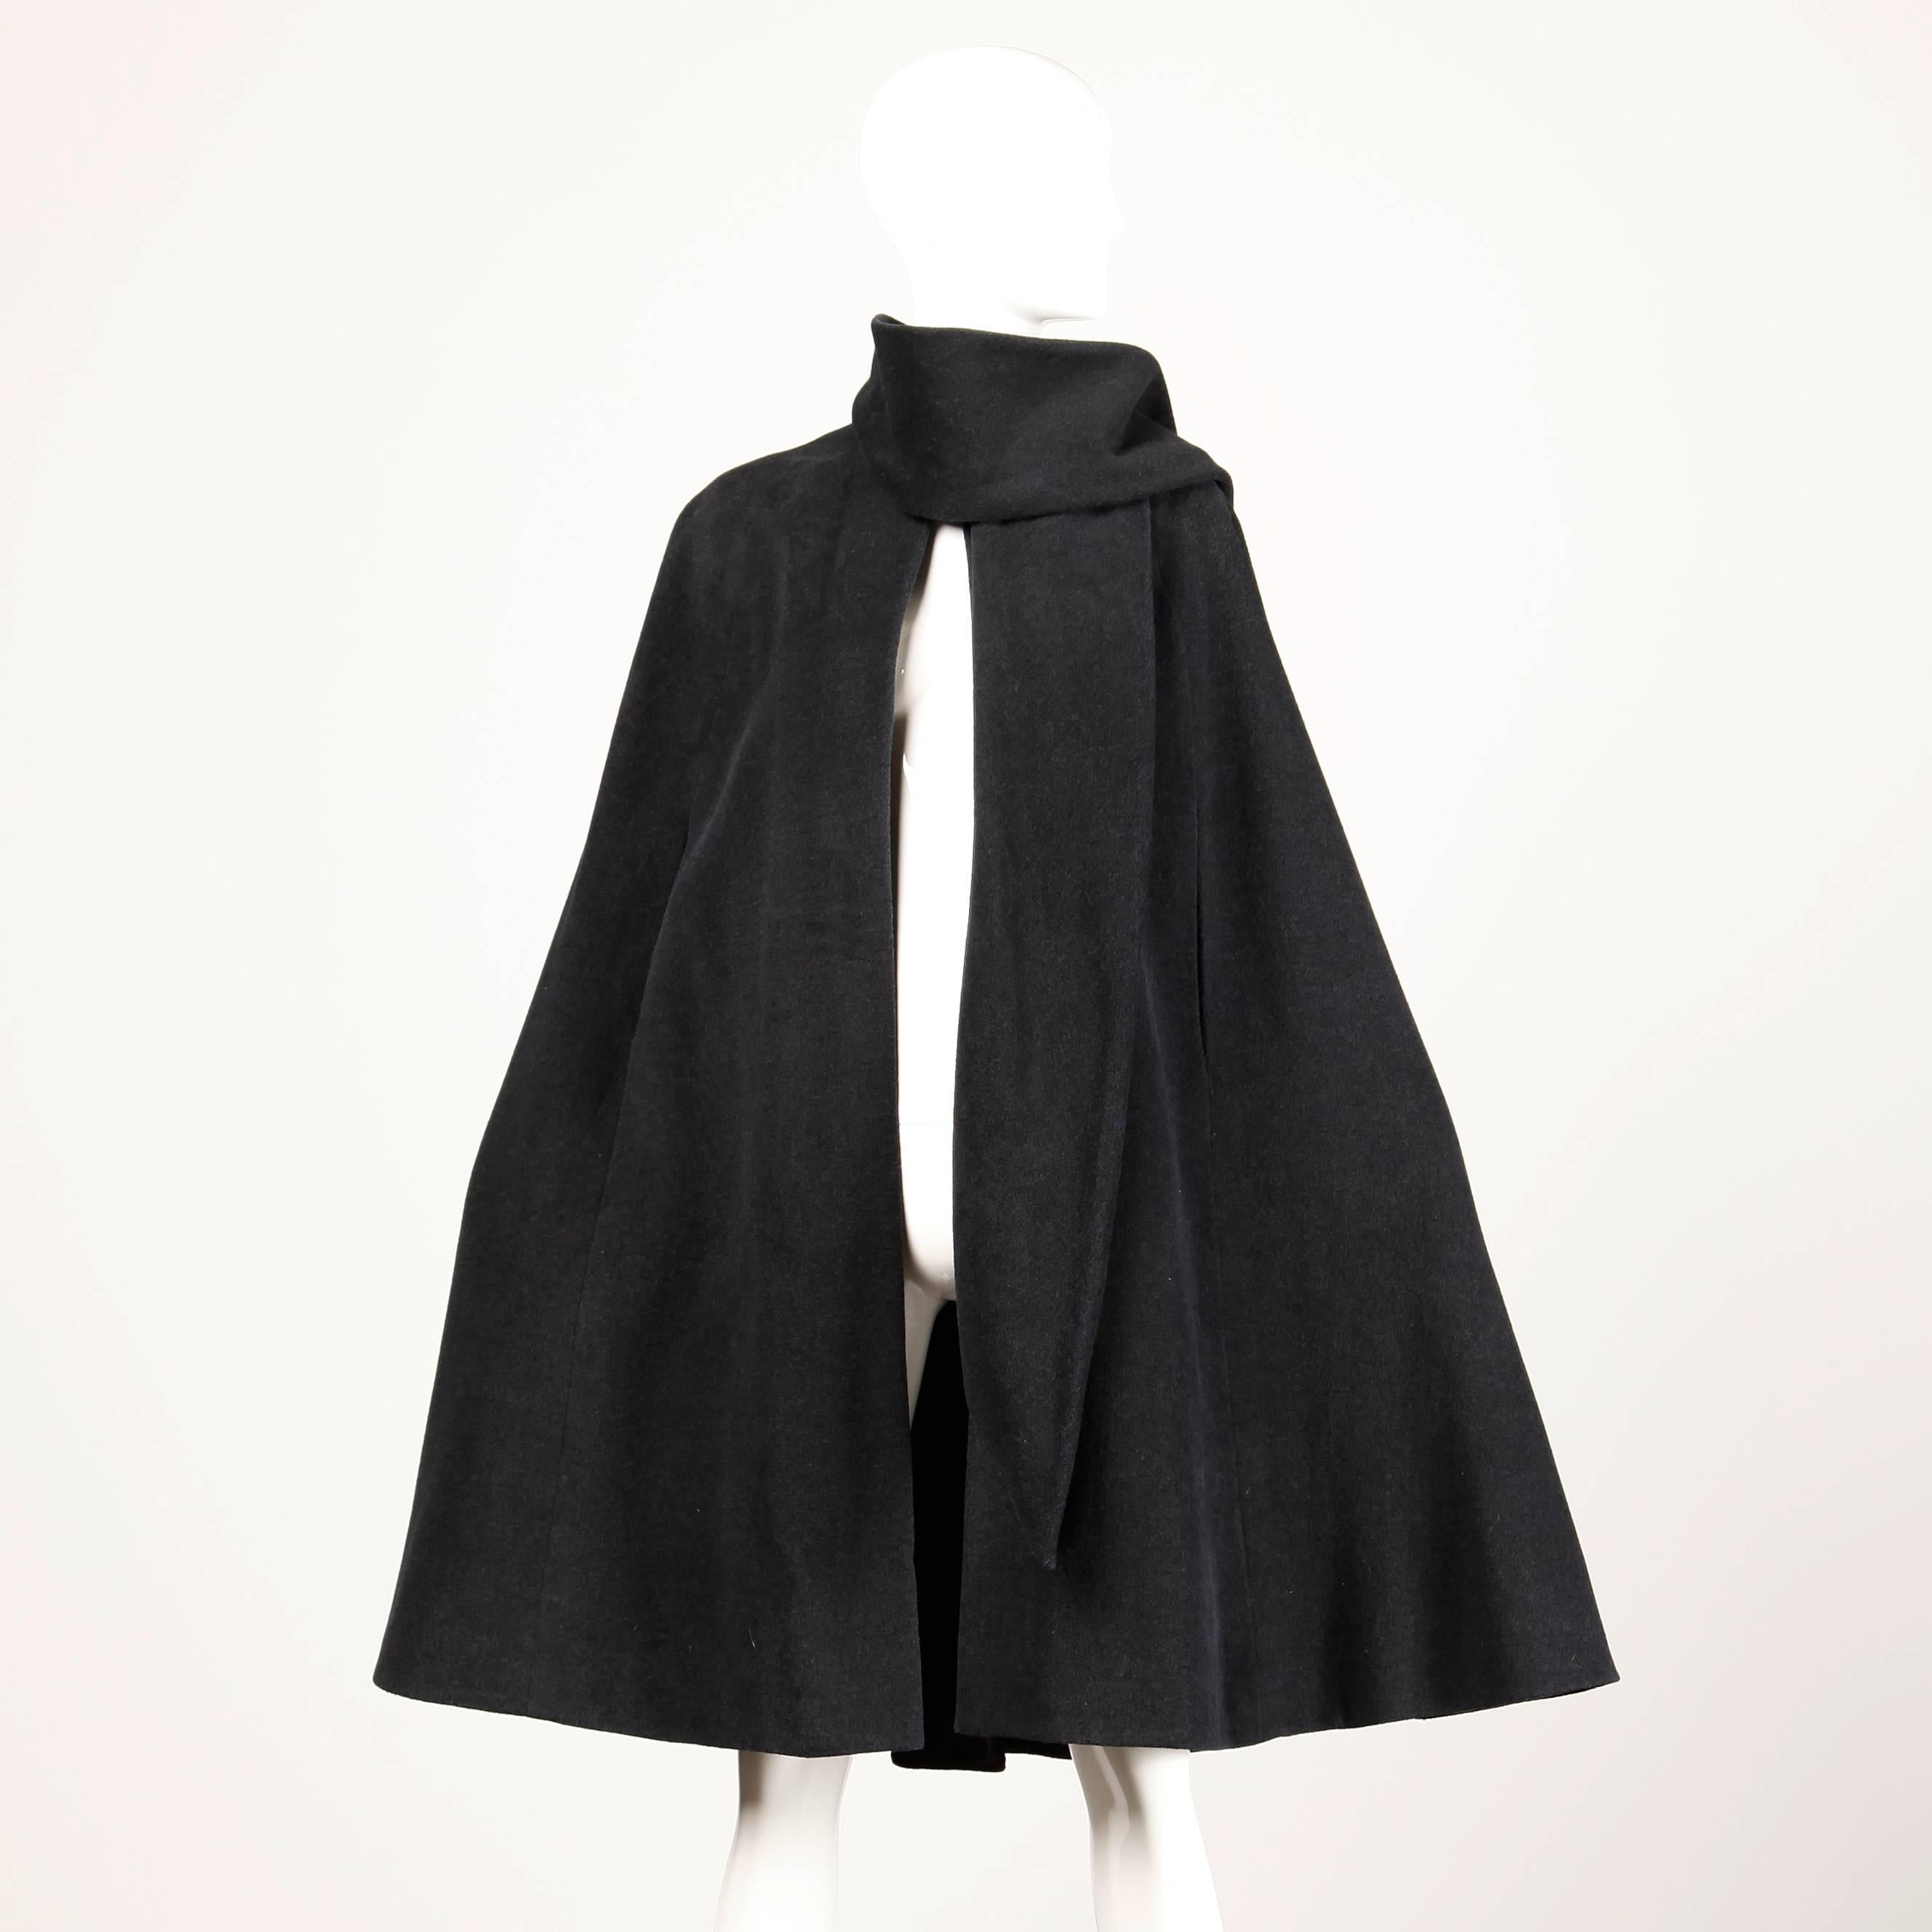 Chic 1960s charcoal gray wool cape coat with attached scarf by Mollie Parnis. Front arm slits and single hook closure at the neck.

Details: 

Fully Lined
Top Hook Closure
Marked Size: 6
Estimated Size: Free (XS-XL)
Color: Charcoal Gray
Fabric: